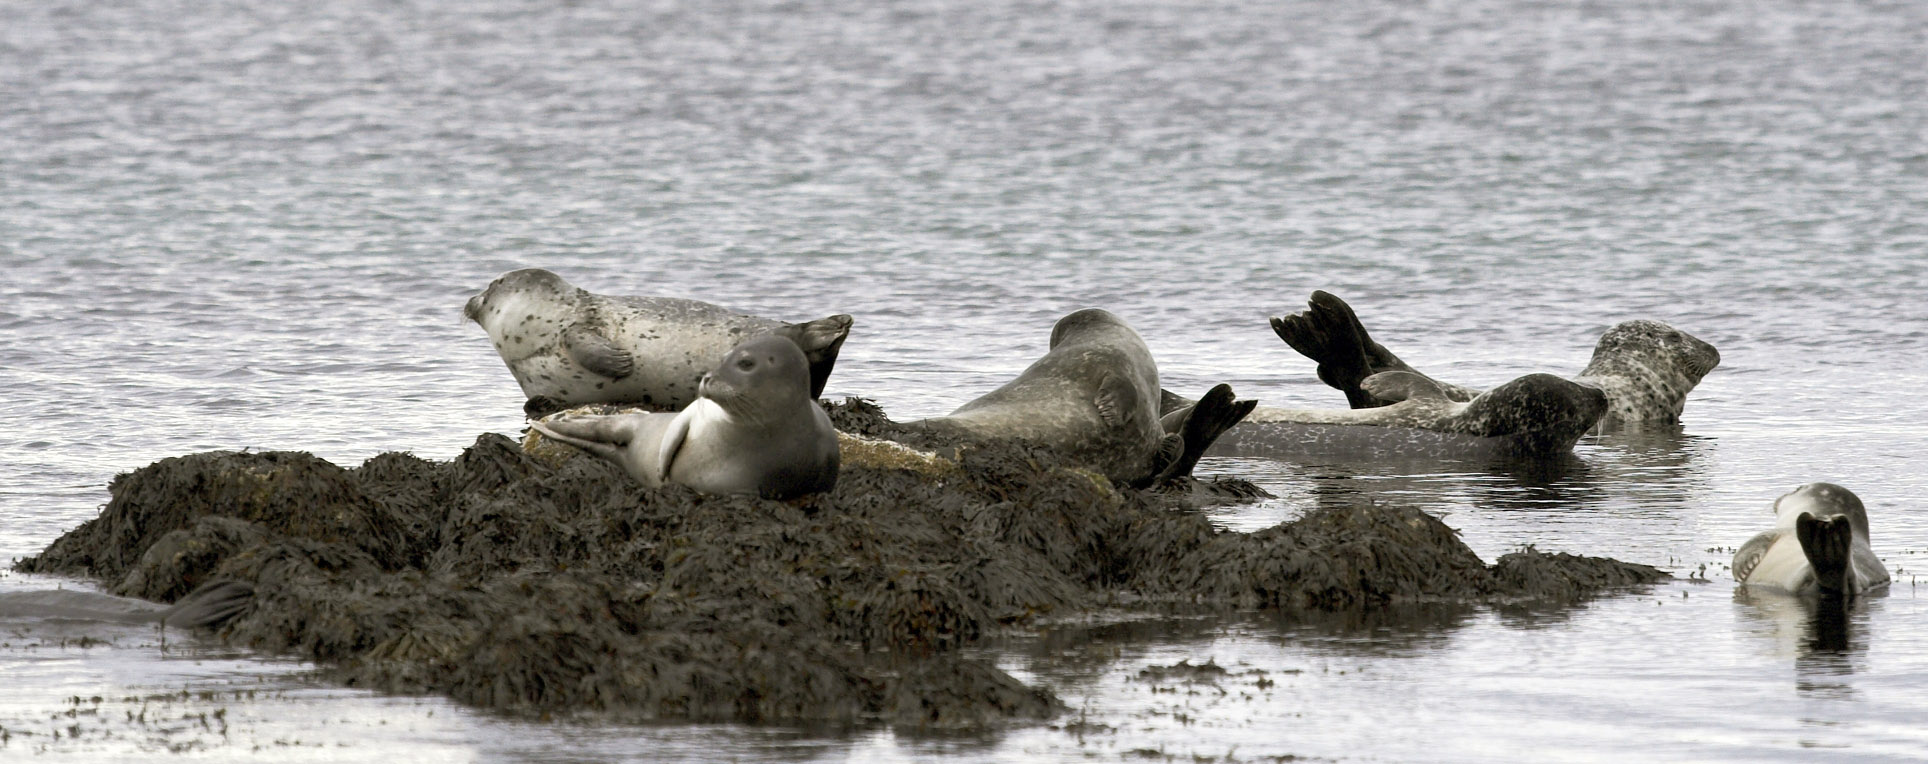 A group of harbour seals relaxing on rocks in the water